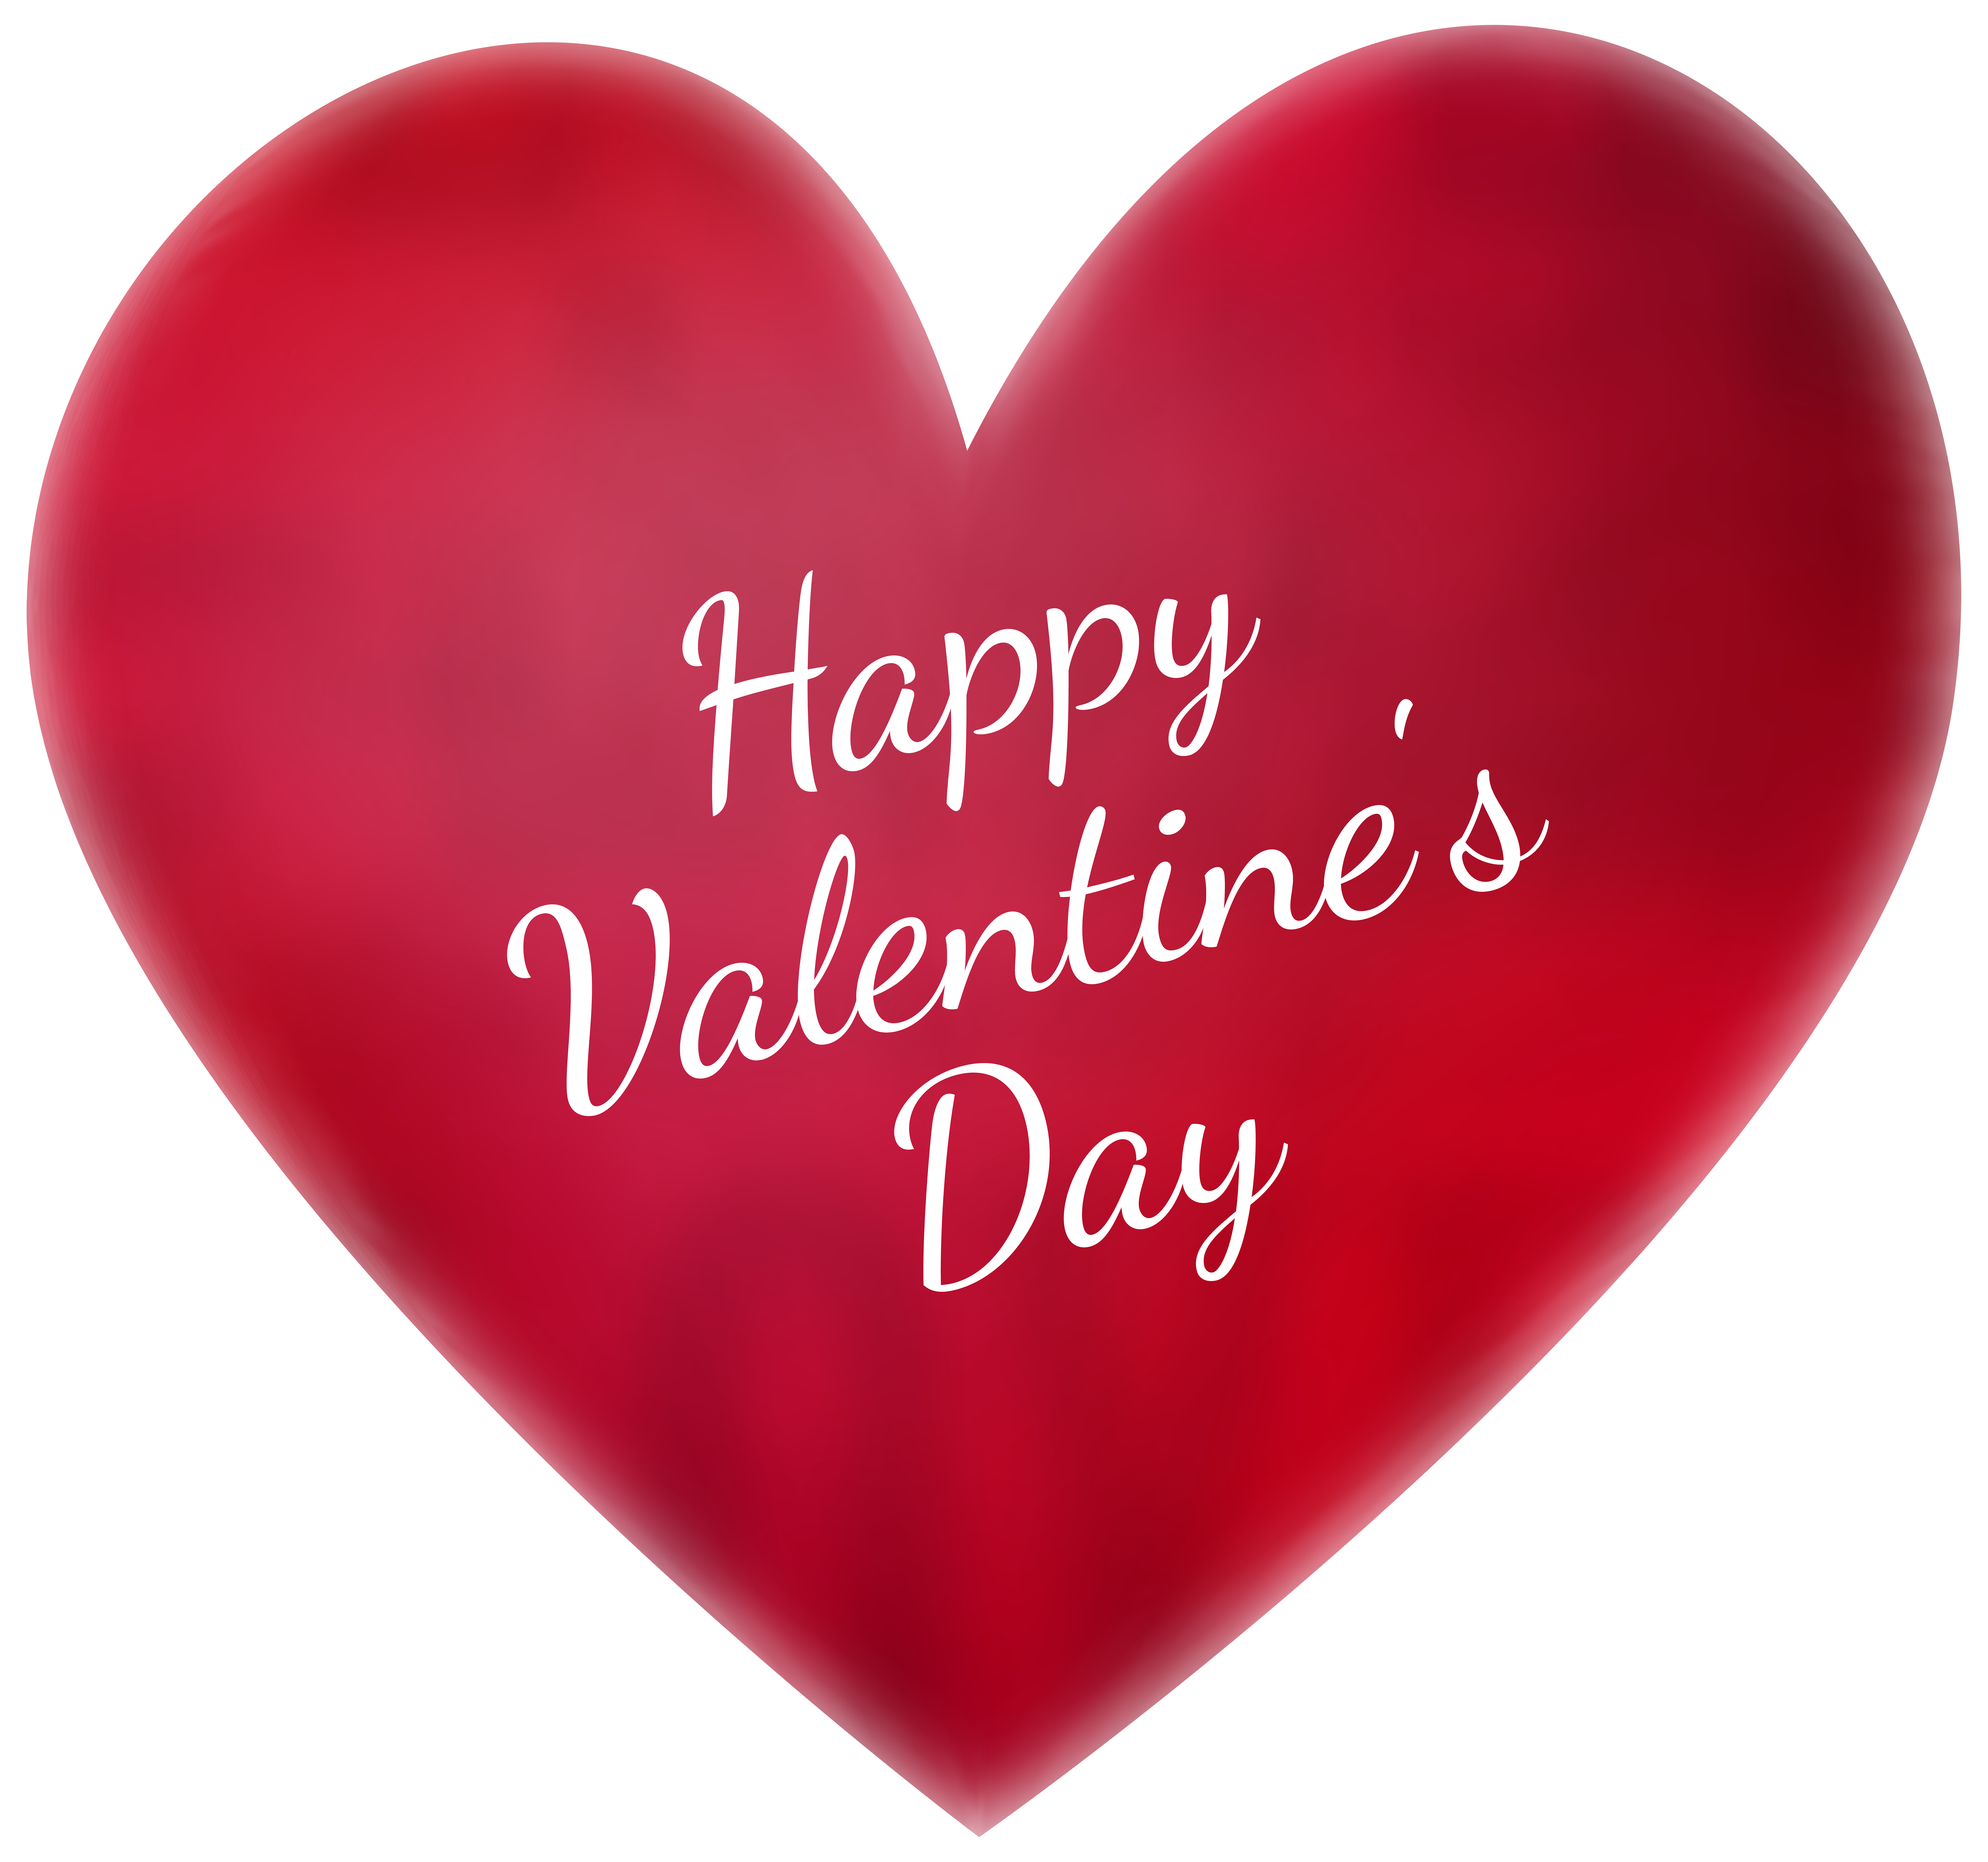 Download happy valentines clipart - Clipground